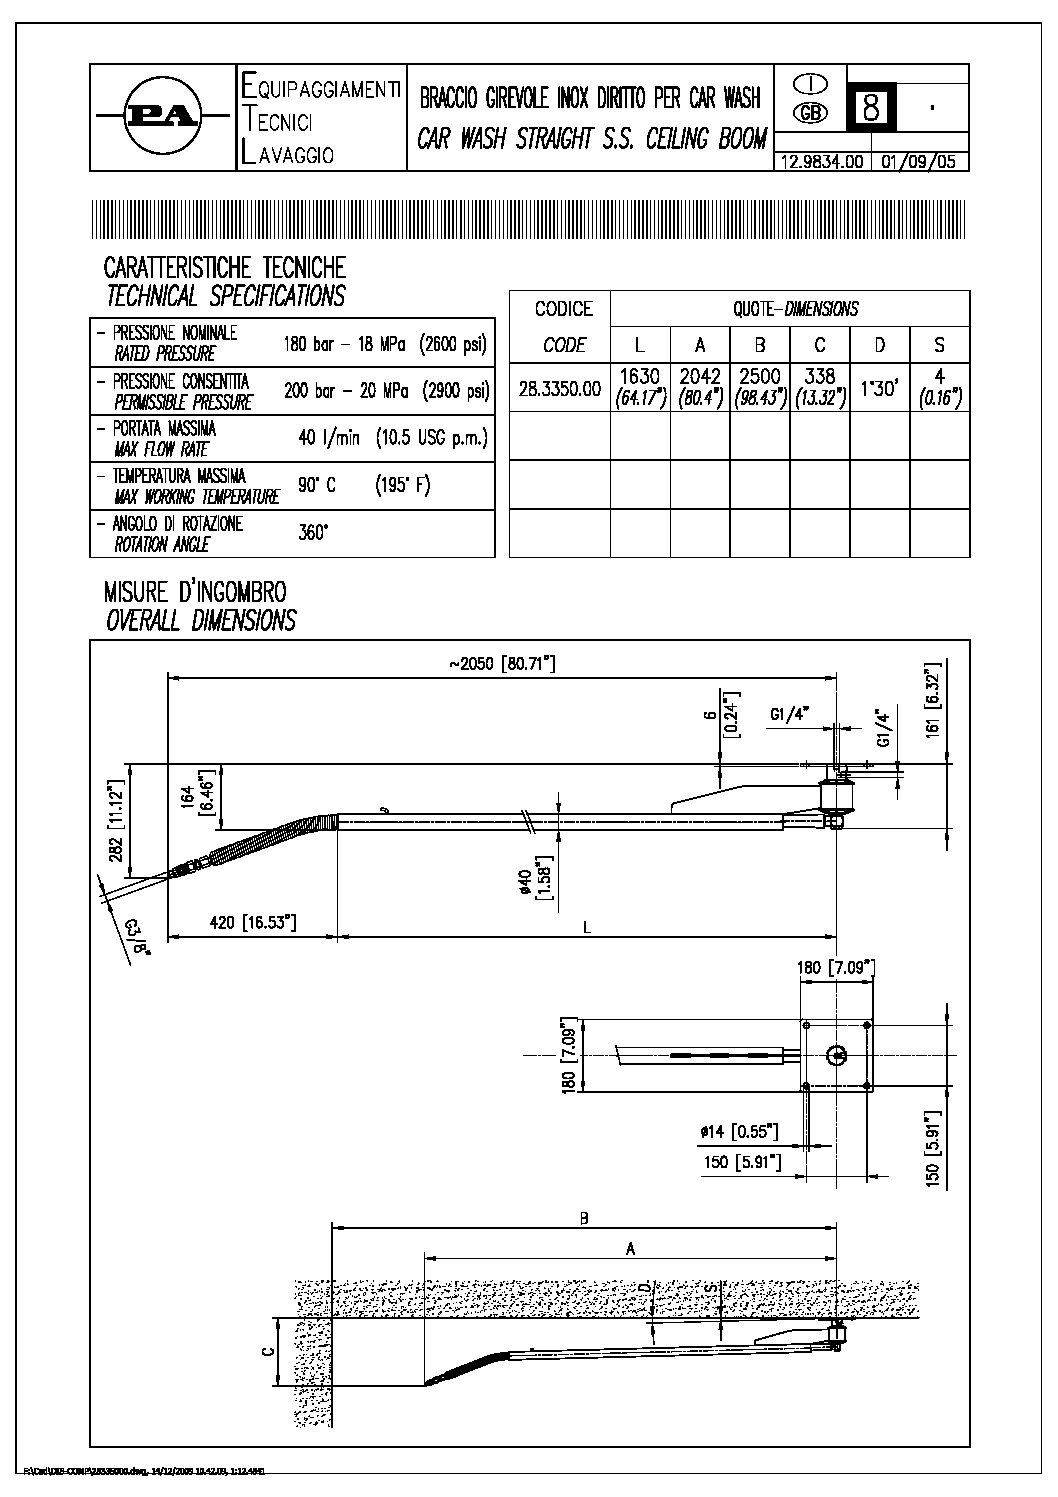 PA Single Rotation Ceiling Boom straight technical information